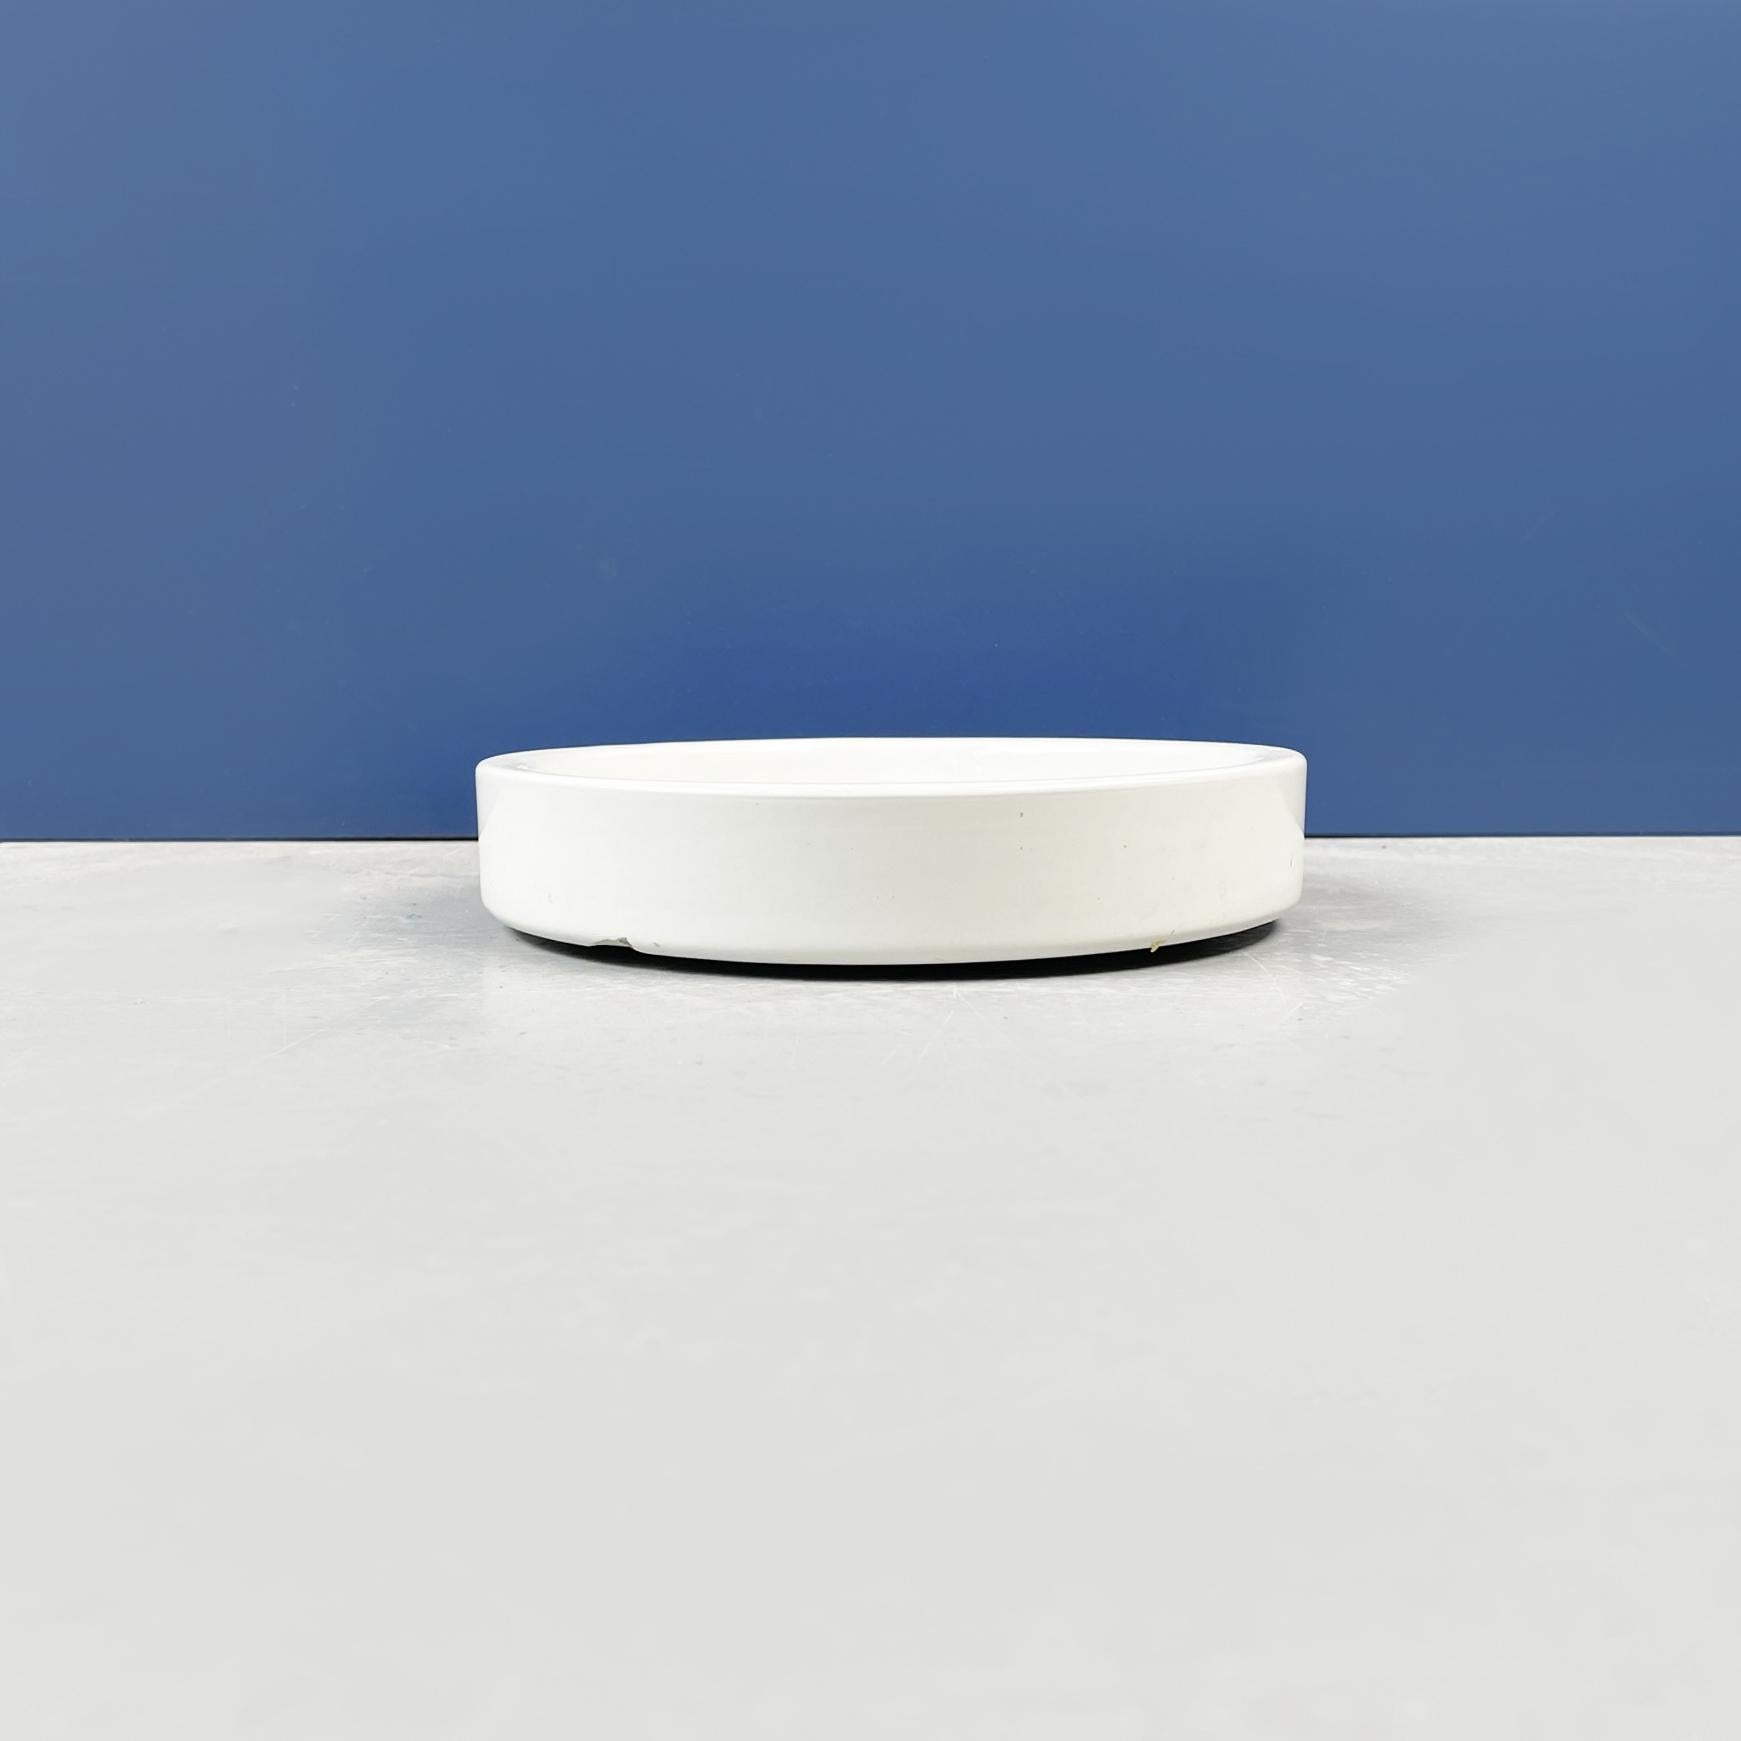 Italian Mid-Century White Porcelain Stoneware Ashtray by Angelo Mangiarotti for Danese, 1970s
Fantastic round ashtray in white porcelain stoneware. The plate has a light rise in the central area. 
Suitable to be placed on any table in your home. It